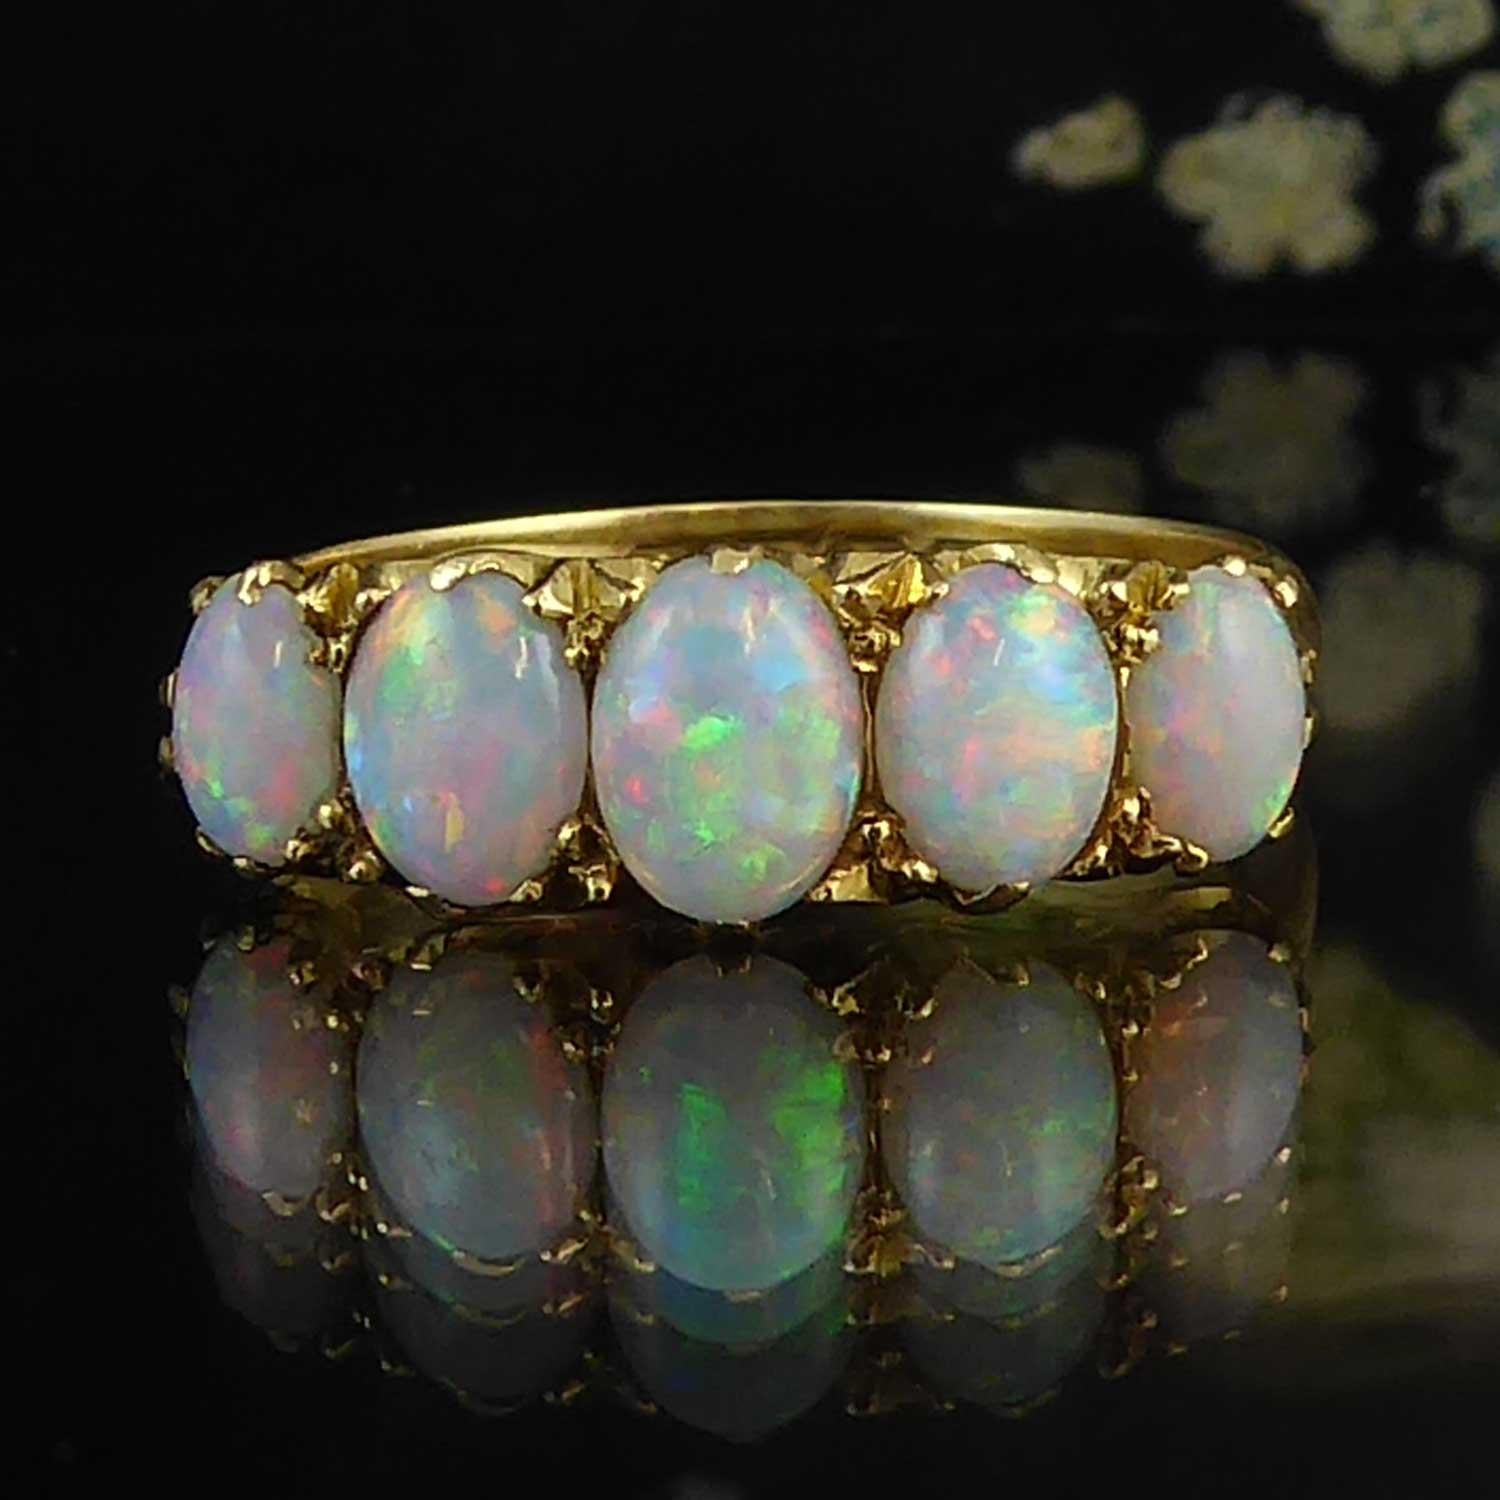 An antique opal ring set with five cabochon cut oval opals graduating in size from the centre opal at approx. 3.0mm x 5.0mm to 2.0mm x 4.0mm at each end. Displaying a play of blue, green and orange fire, the opals are complimented by the yellow gold